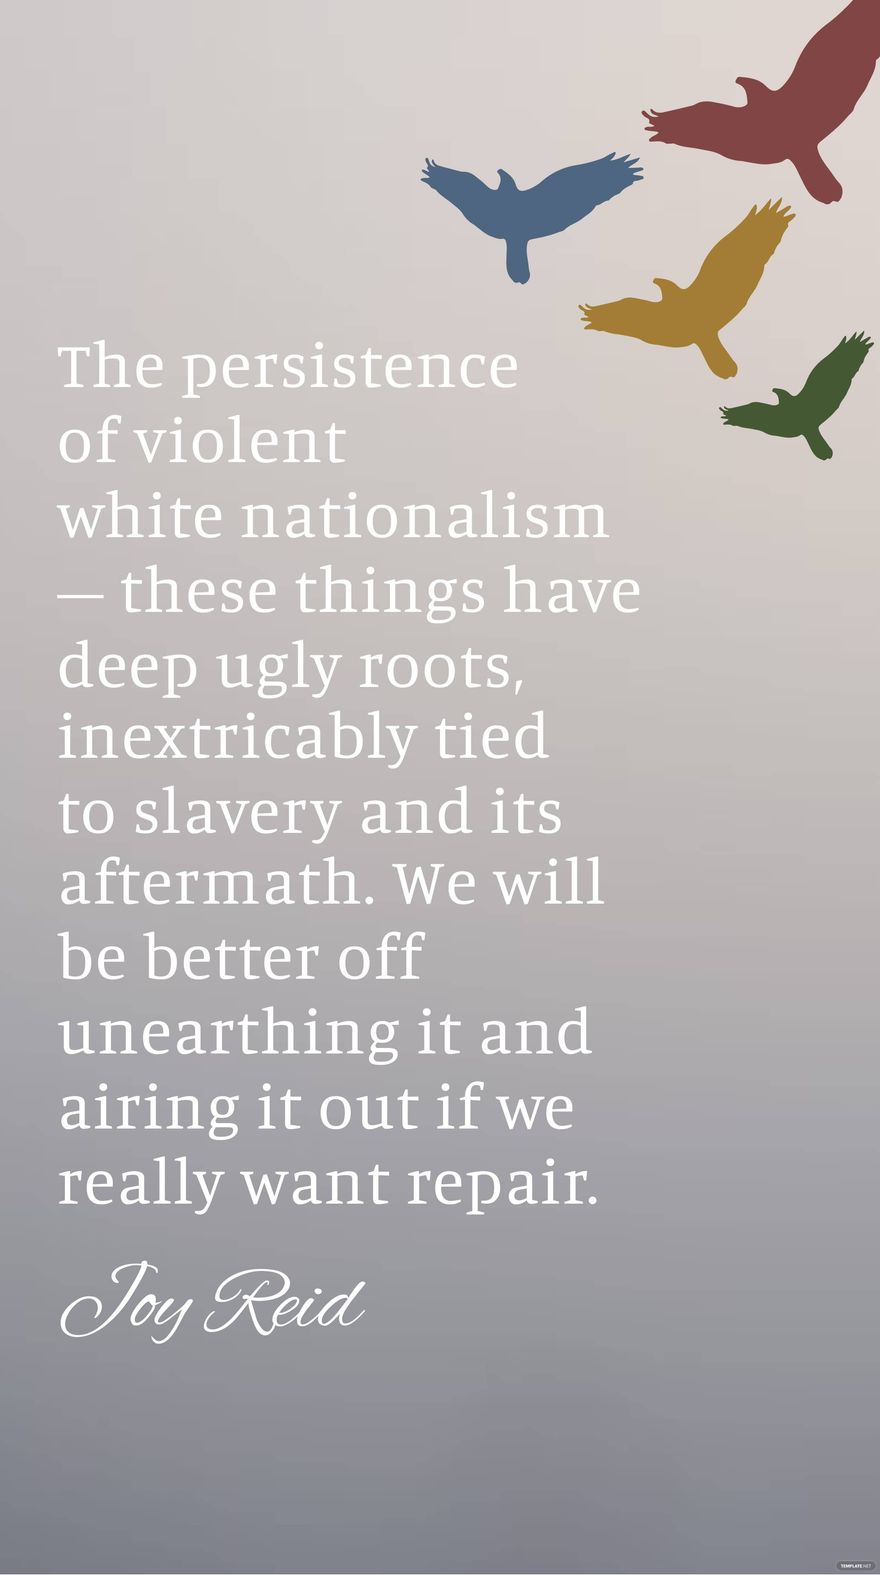 Joy Reid - The persistence of violent white nationalism – these things have deep ugly roots, inextricably tied to slavery and its aftermath. We will be better off unearthing it and airing it out if we